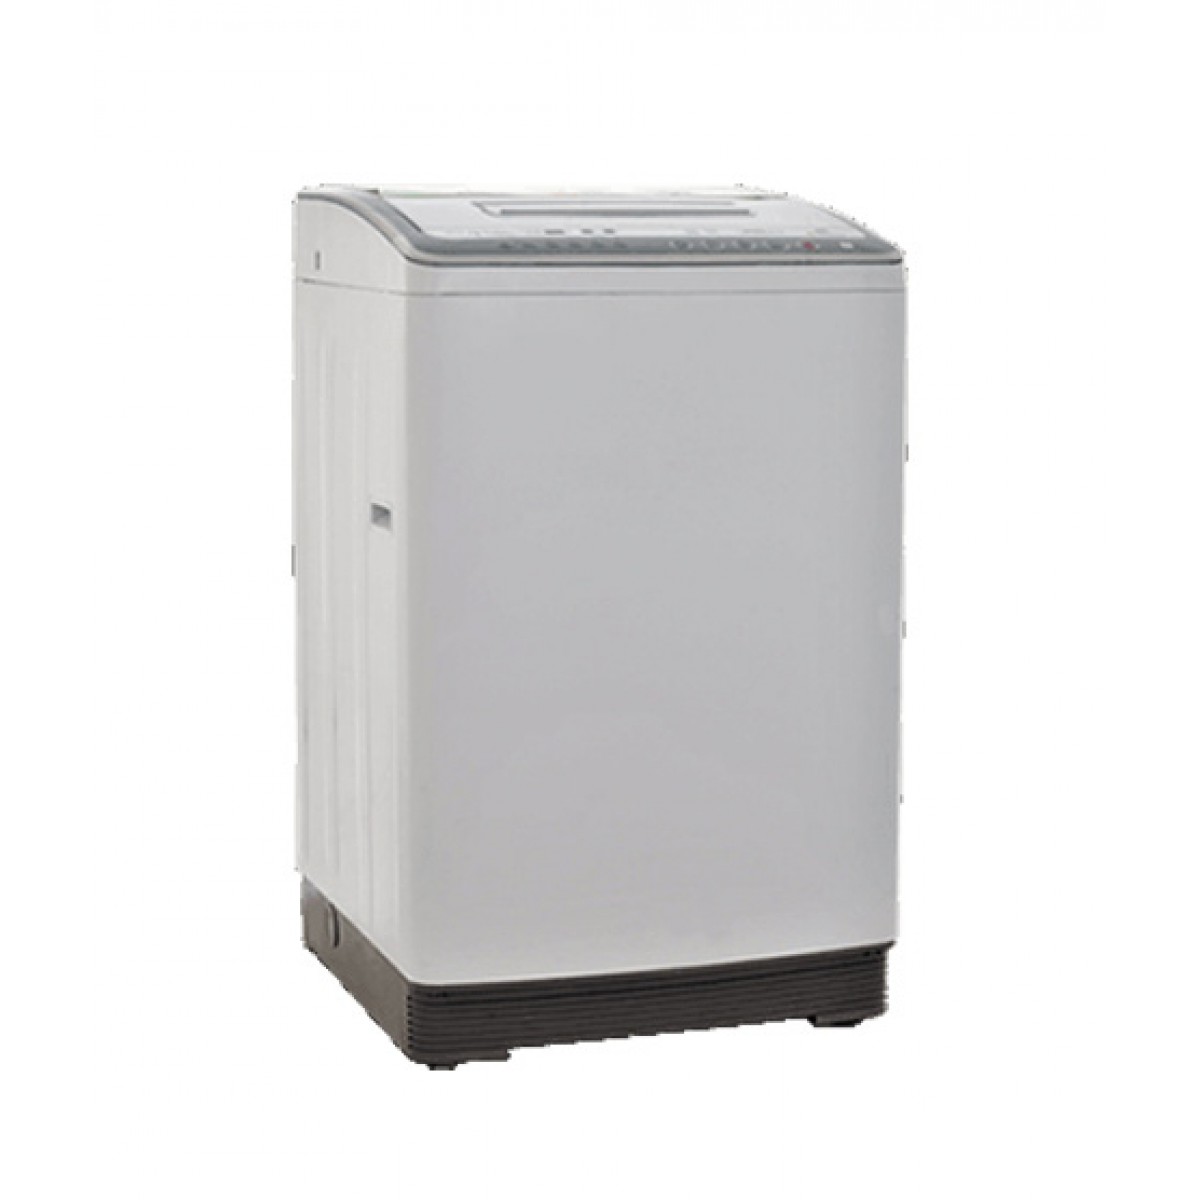 Dawlance Top Load Fully Automatic Washing Machine DWT230A Price in